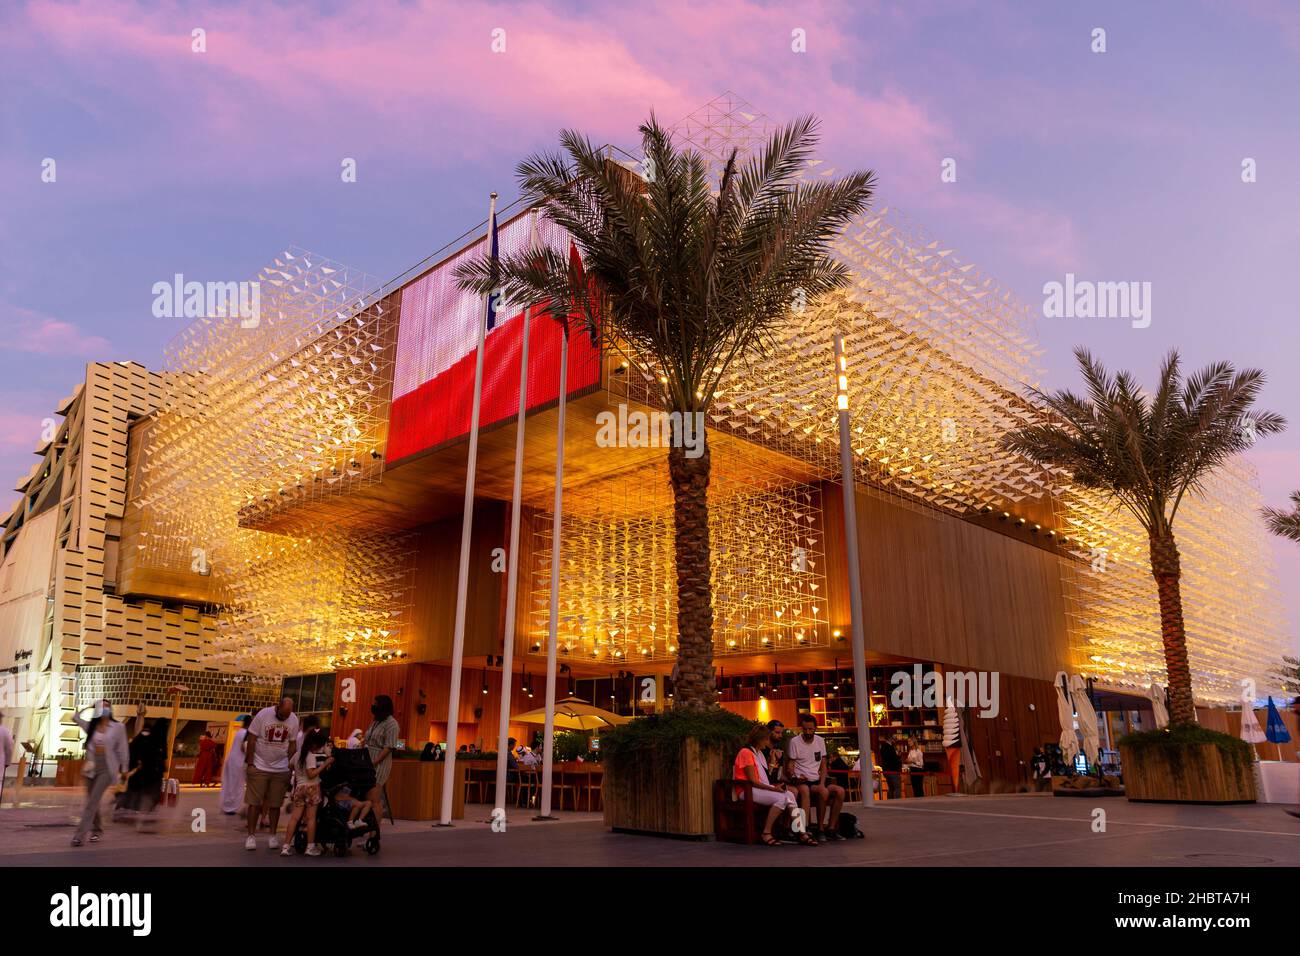 Dubai, UAE, 09.12.2021. Illuminated Poland Pavilion at Expo 2020 Dubai, with wooden facade covered in sculptures representing flying birds and Polish Stock Photo